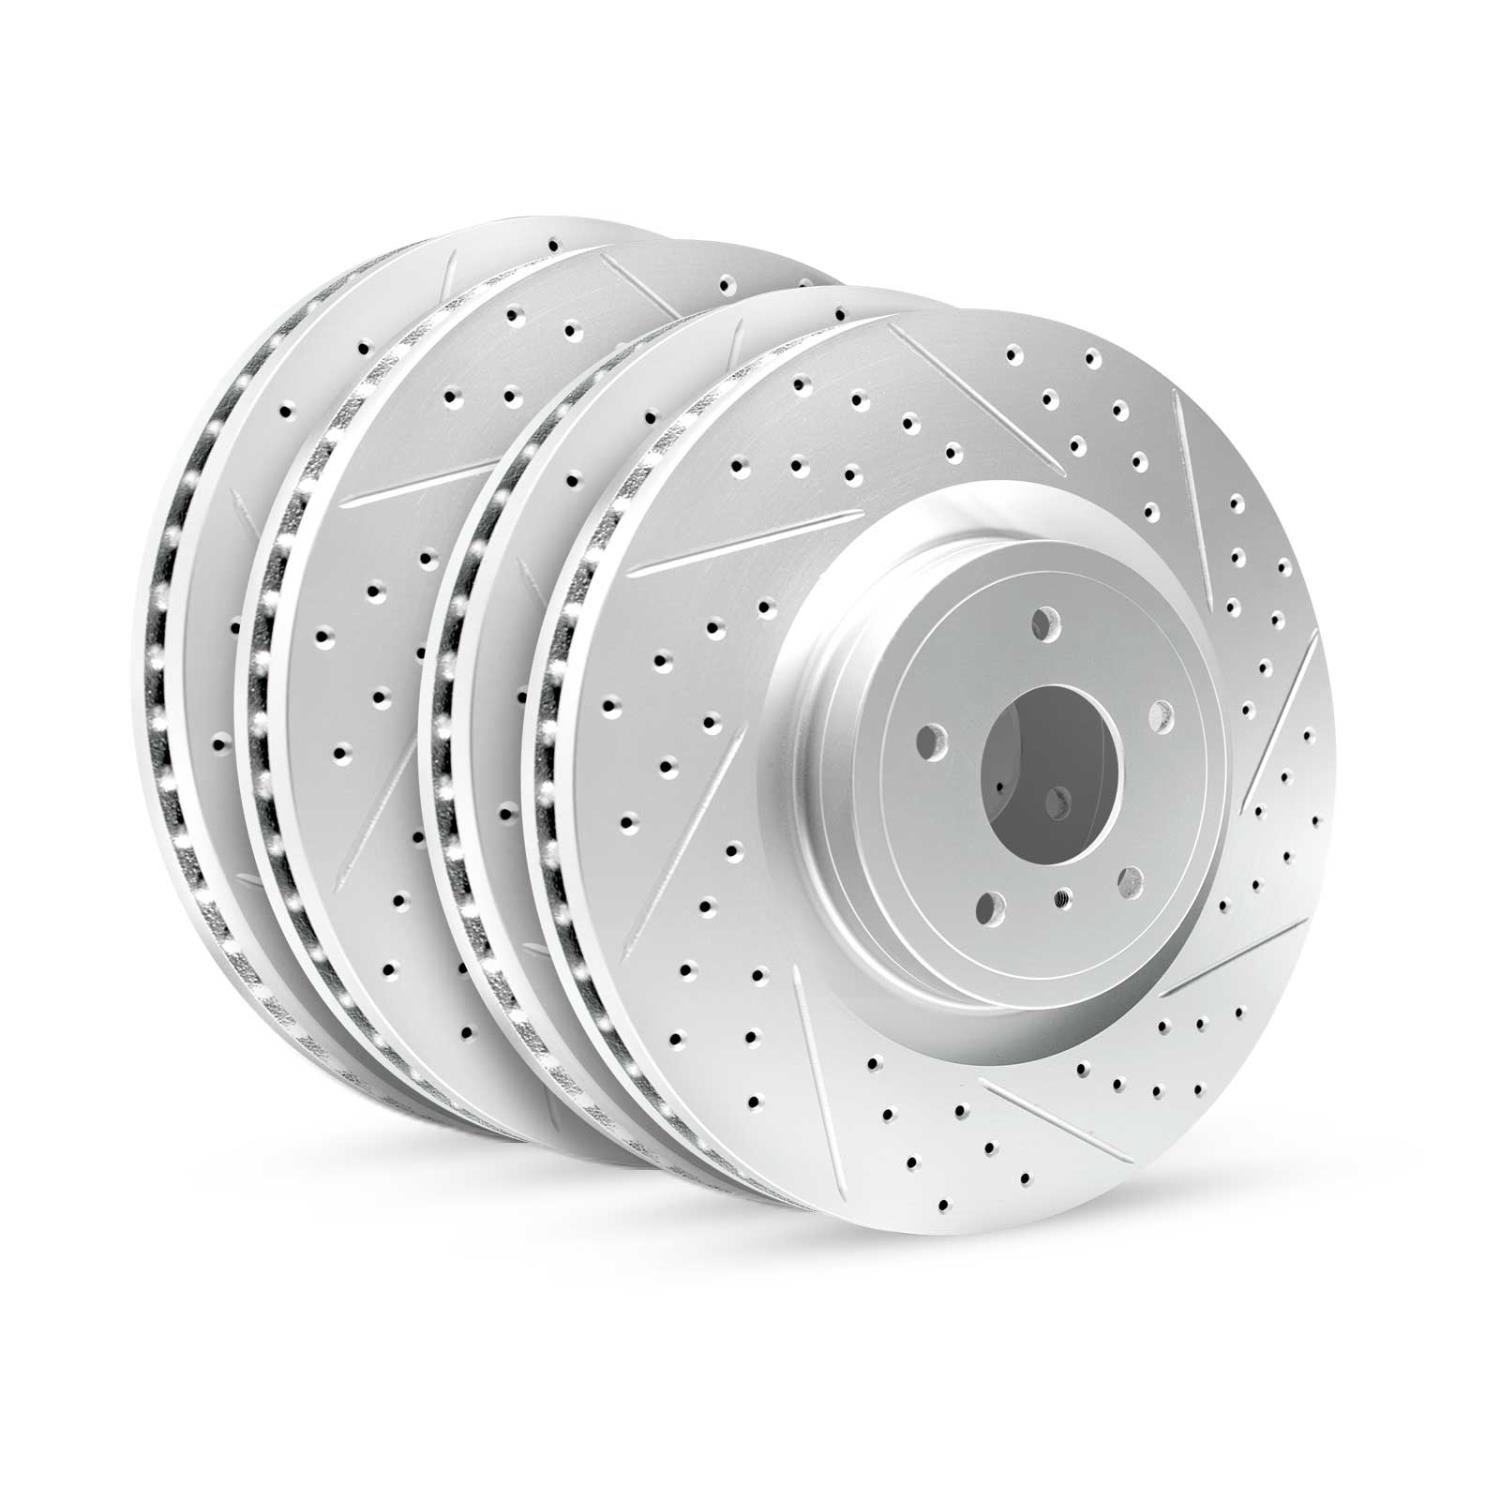 GEO-Carbon Drilled/Slotted Rotors, 2012-2013 Kia/Hyundai/Genesis, Position: Front/Rear